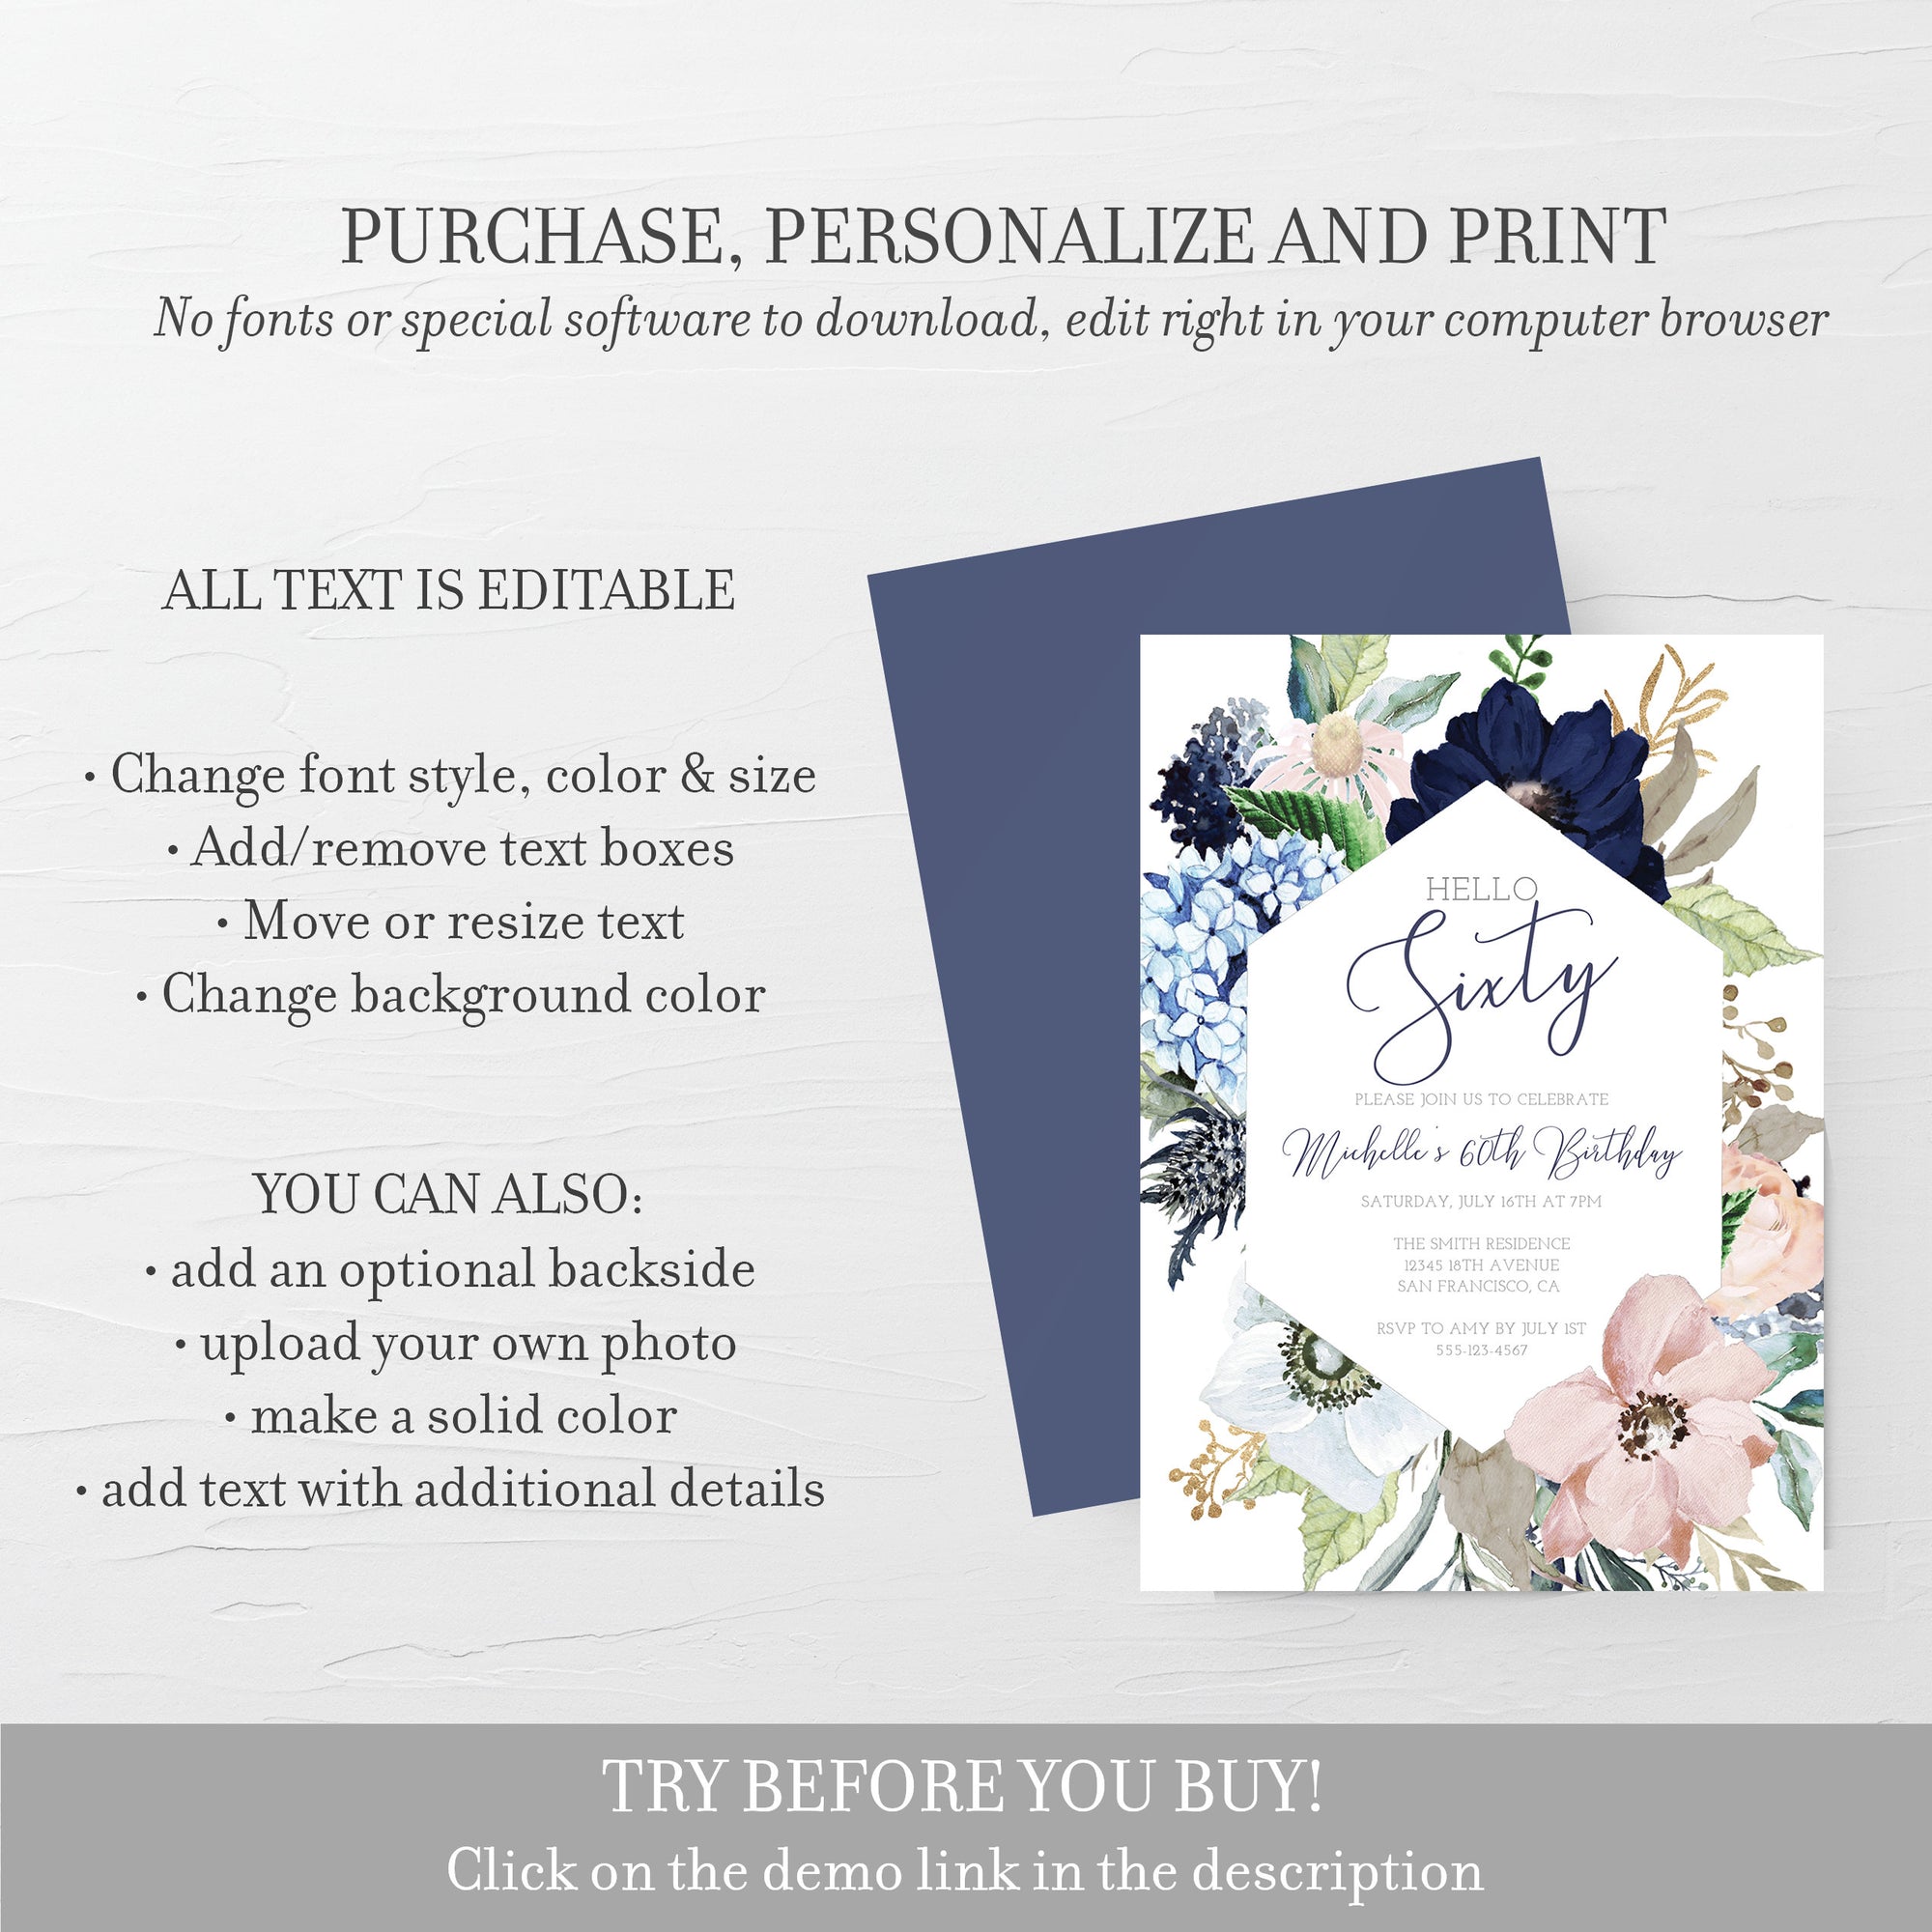 60th Birthday Invitation For Women, Printable 60th Birthday Party Invitation, Navy Blush Floral 60th Birthday Invite, INSTANT DOWNLOAD MB100